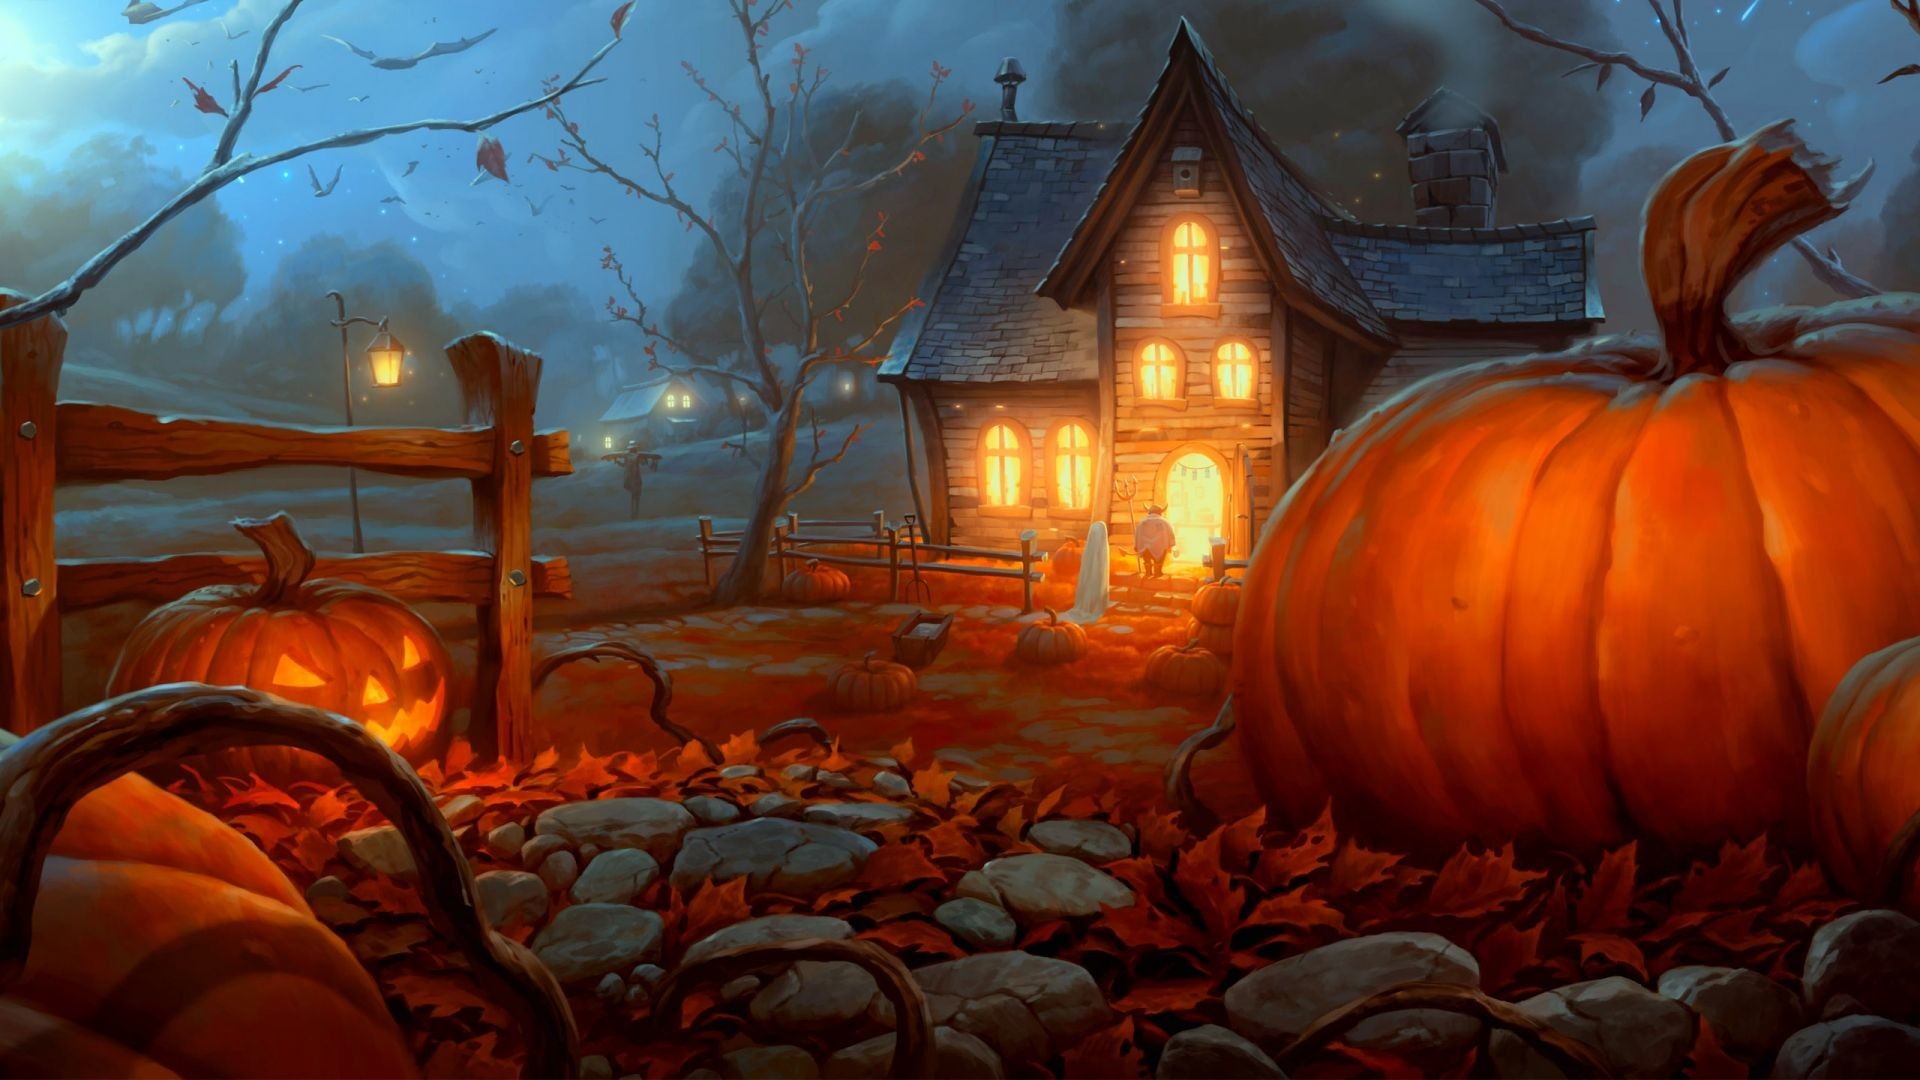 1920x1080 Collection of Fall Halloween Backgrounds on HDWallpapers